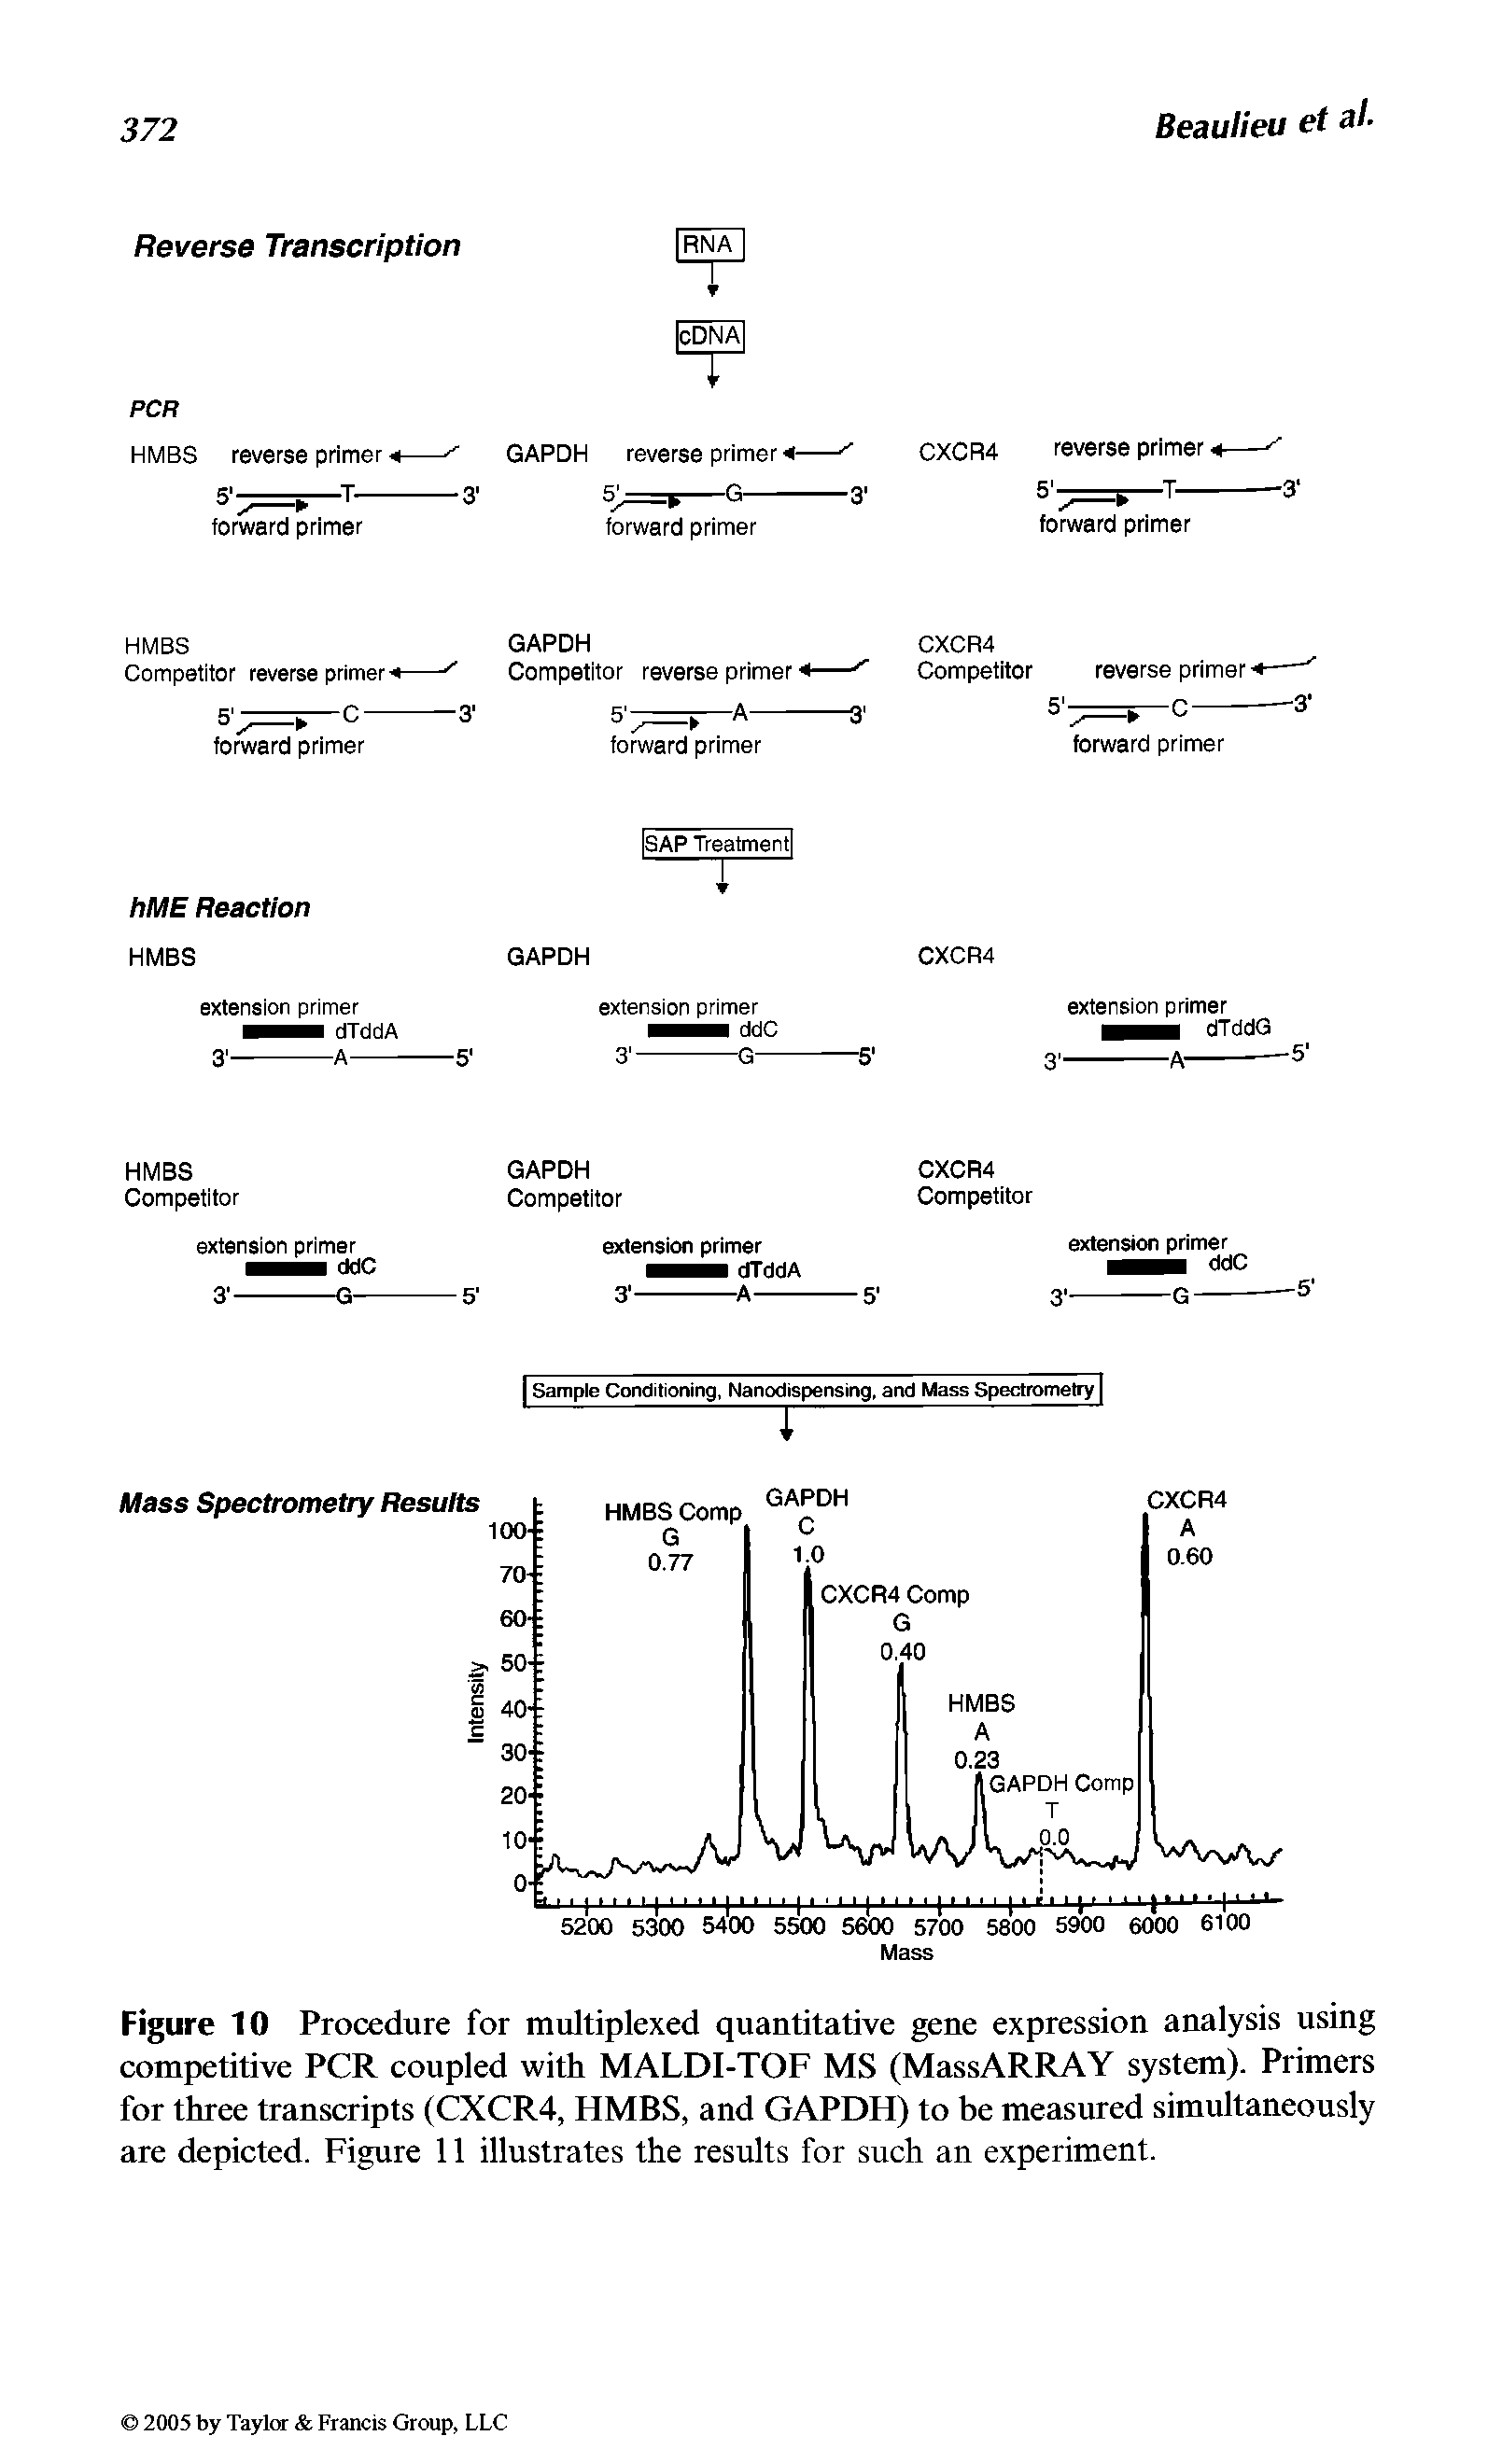 Figure 10 Procedure for multiplexed quantitative gene expression analysis using competitive PCR coupled with MALDI-TOF MS (MassARRAY system). Primers for three transcripts (CXCR4, HMBS, and GAPDH) to be measured simultaneously are depicted. Figure 11 illustrates the results for such an experiment.